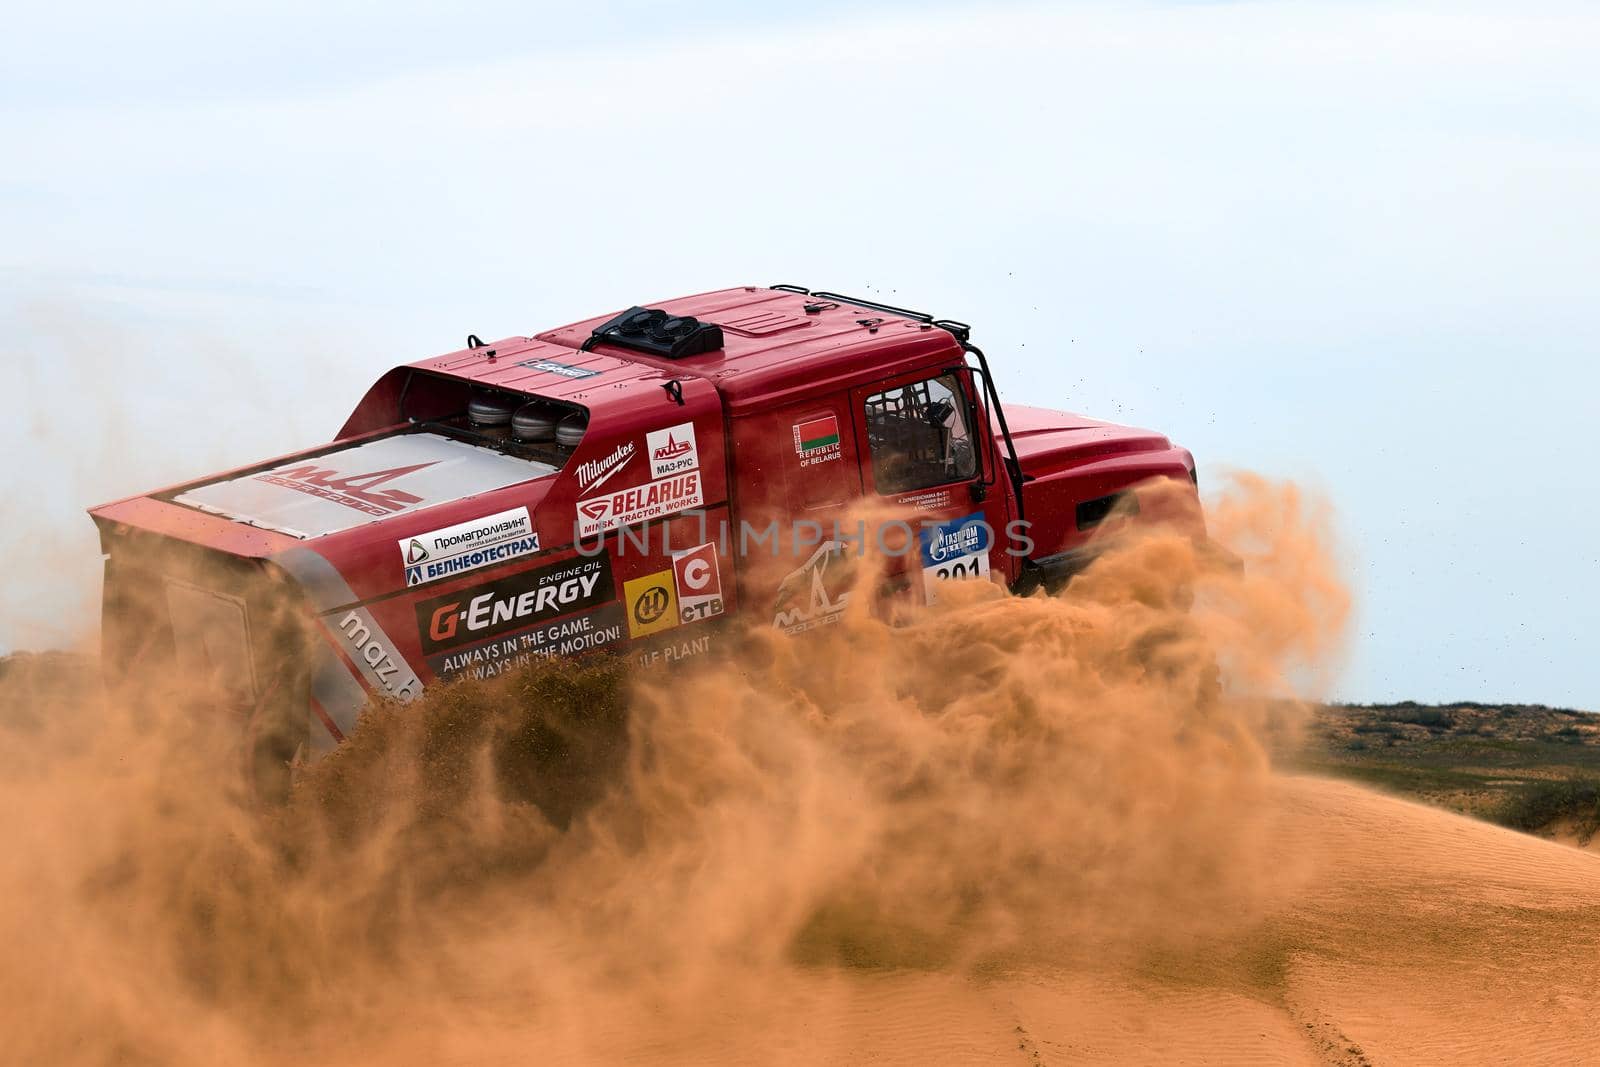 Sports truck MAZ Sport-auto team gets over the difficult part of the route during the Rally raid in sand. THE GOLD OF KAGAN-2021. 26.04.2021 Astrakhan, Russia by EvgeniyQW